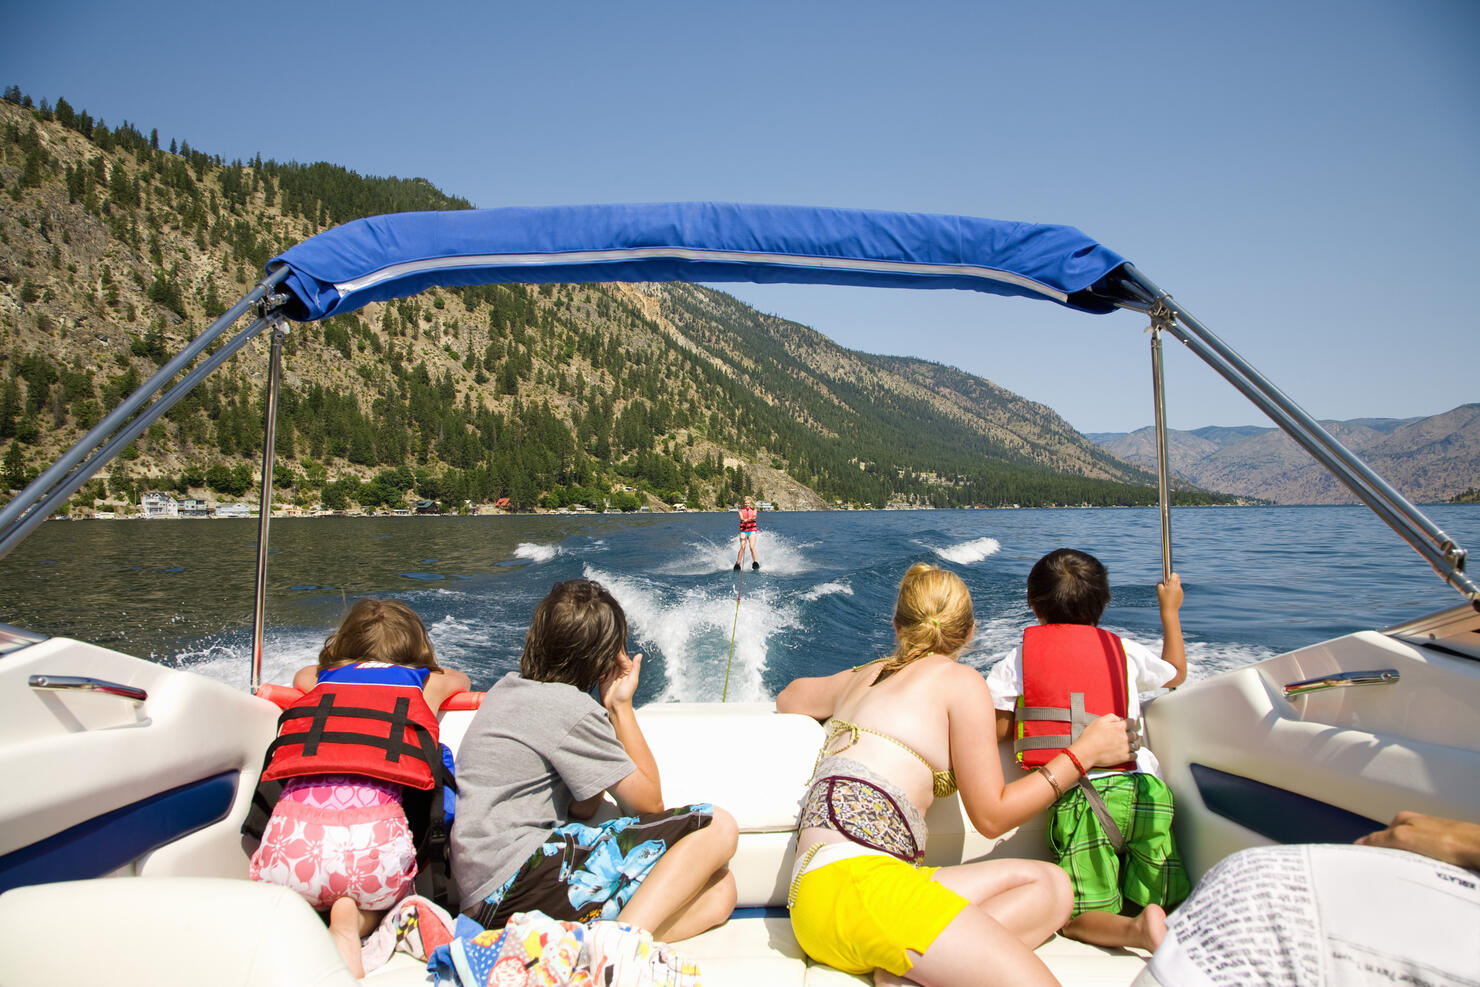 Family in a motorboat and looking at a person waterskiing, Lake Chelan, Washington State, USA